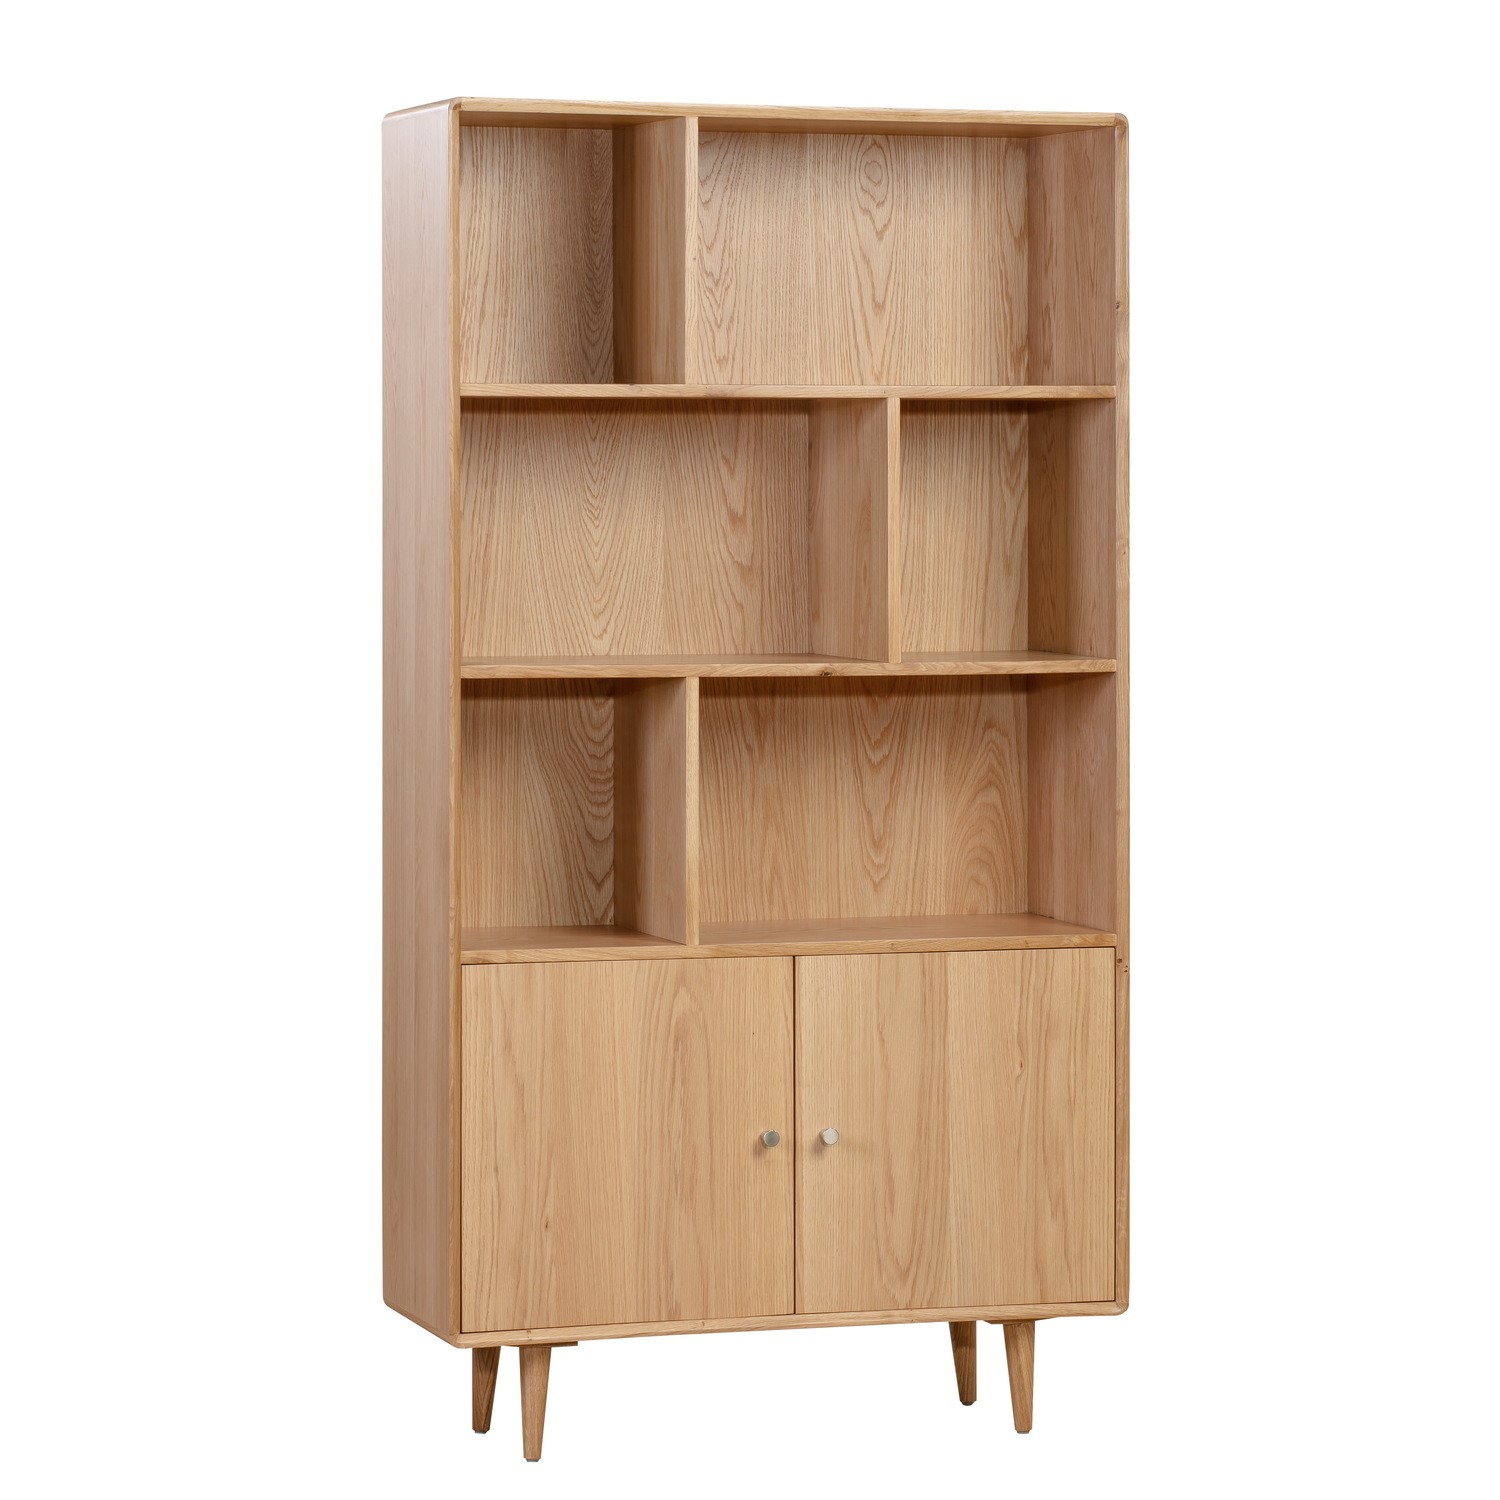 Read more about Solid oak bookcase with 2 doors marny